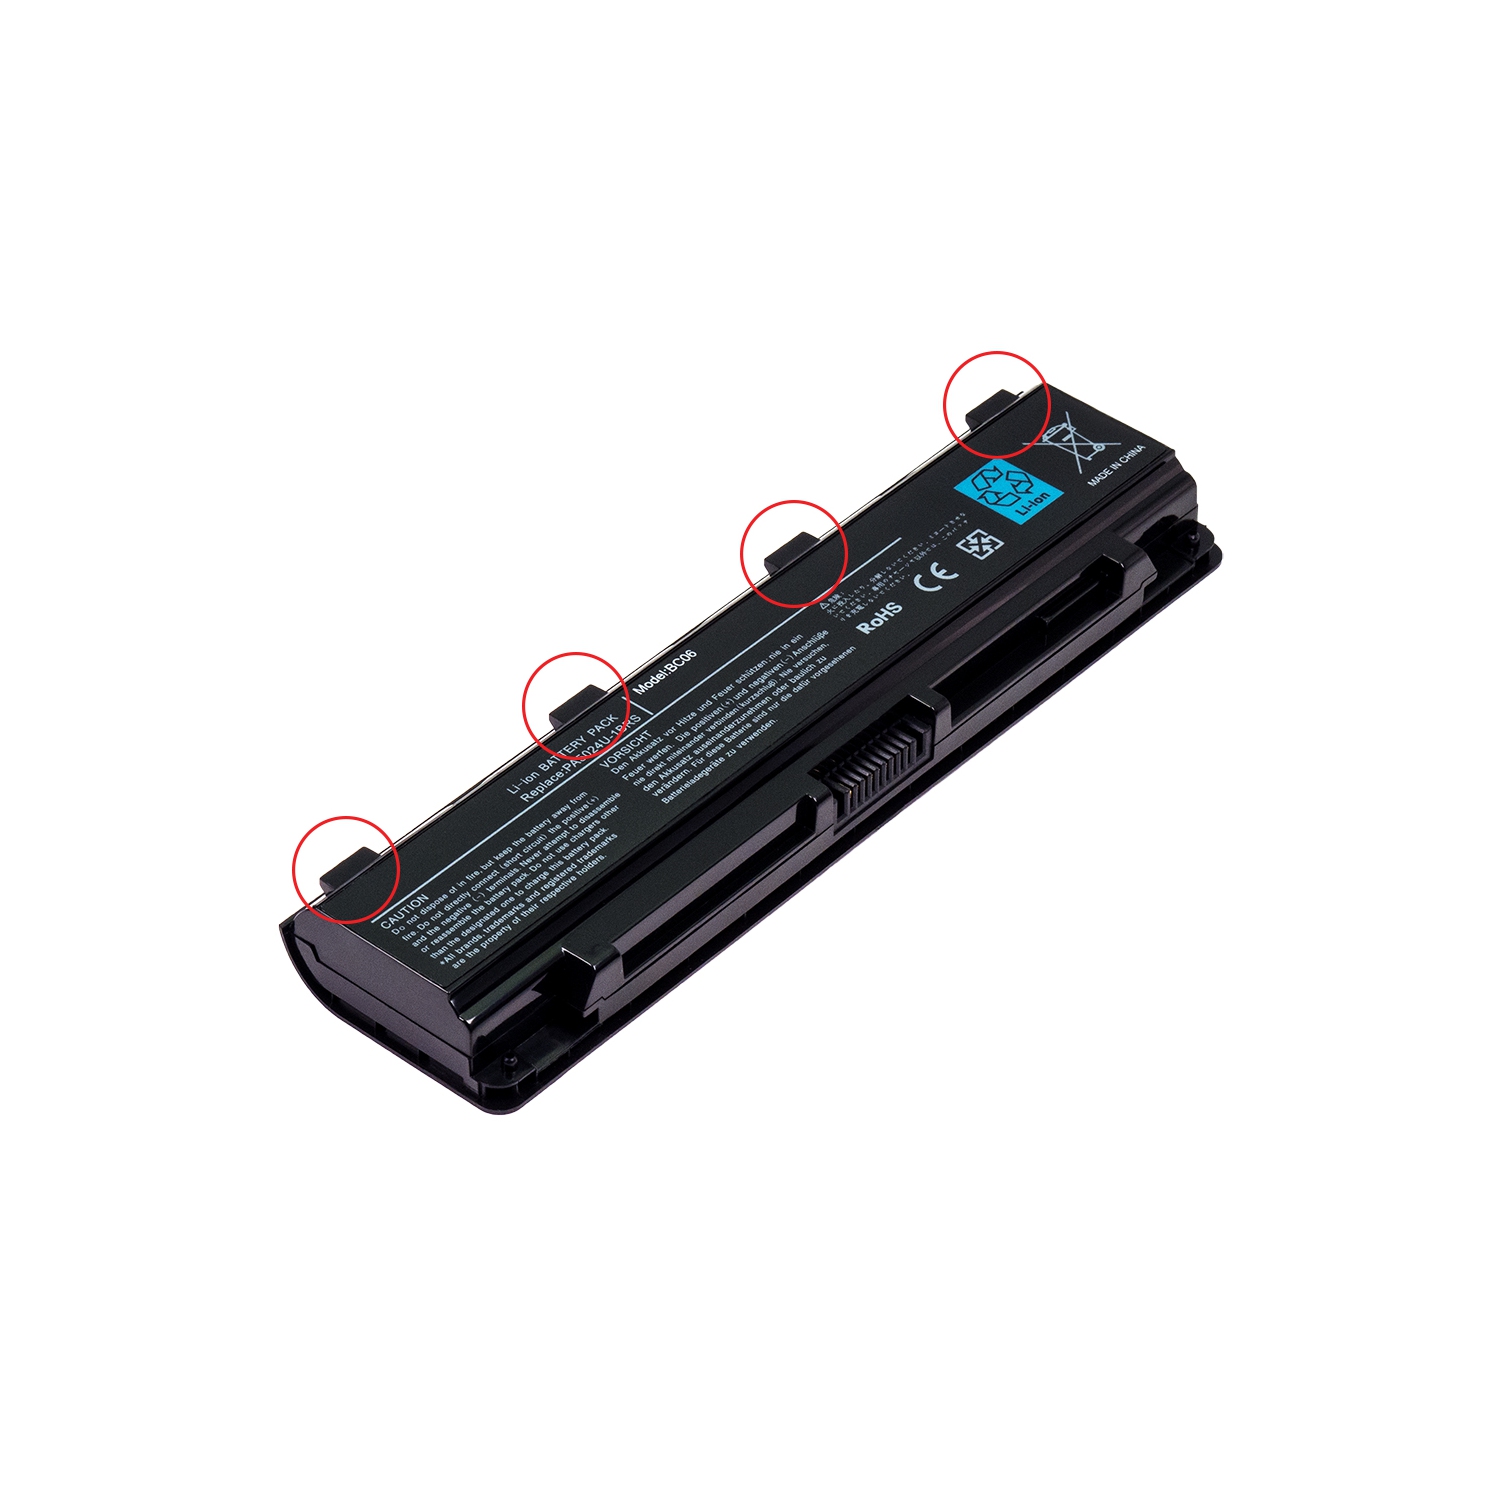 BATTDEPOT NEW Laptop Battery for Toshiba Satellite S70-A PABAS262 PABAS263 PABAS274 [48Wh]